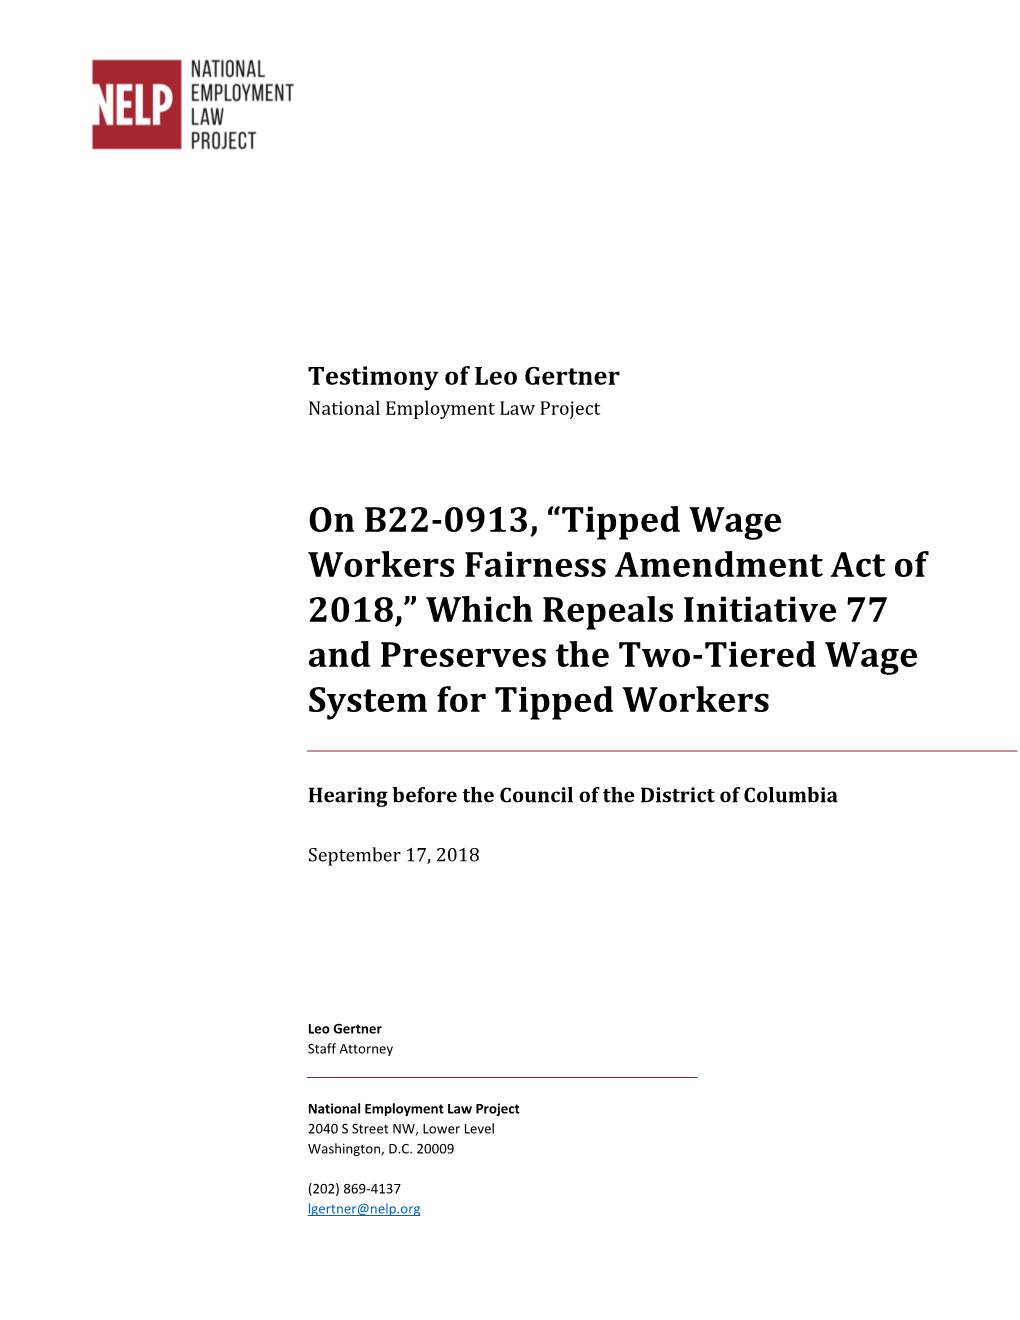 On B22-0913, “Tipped Wage Workers Fairness Amendment Act of 2018,” Which Repeals Initiative 77 and Preserves the Two-Tiered Wage System for Tipped Workers